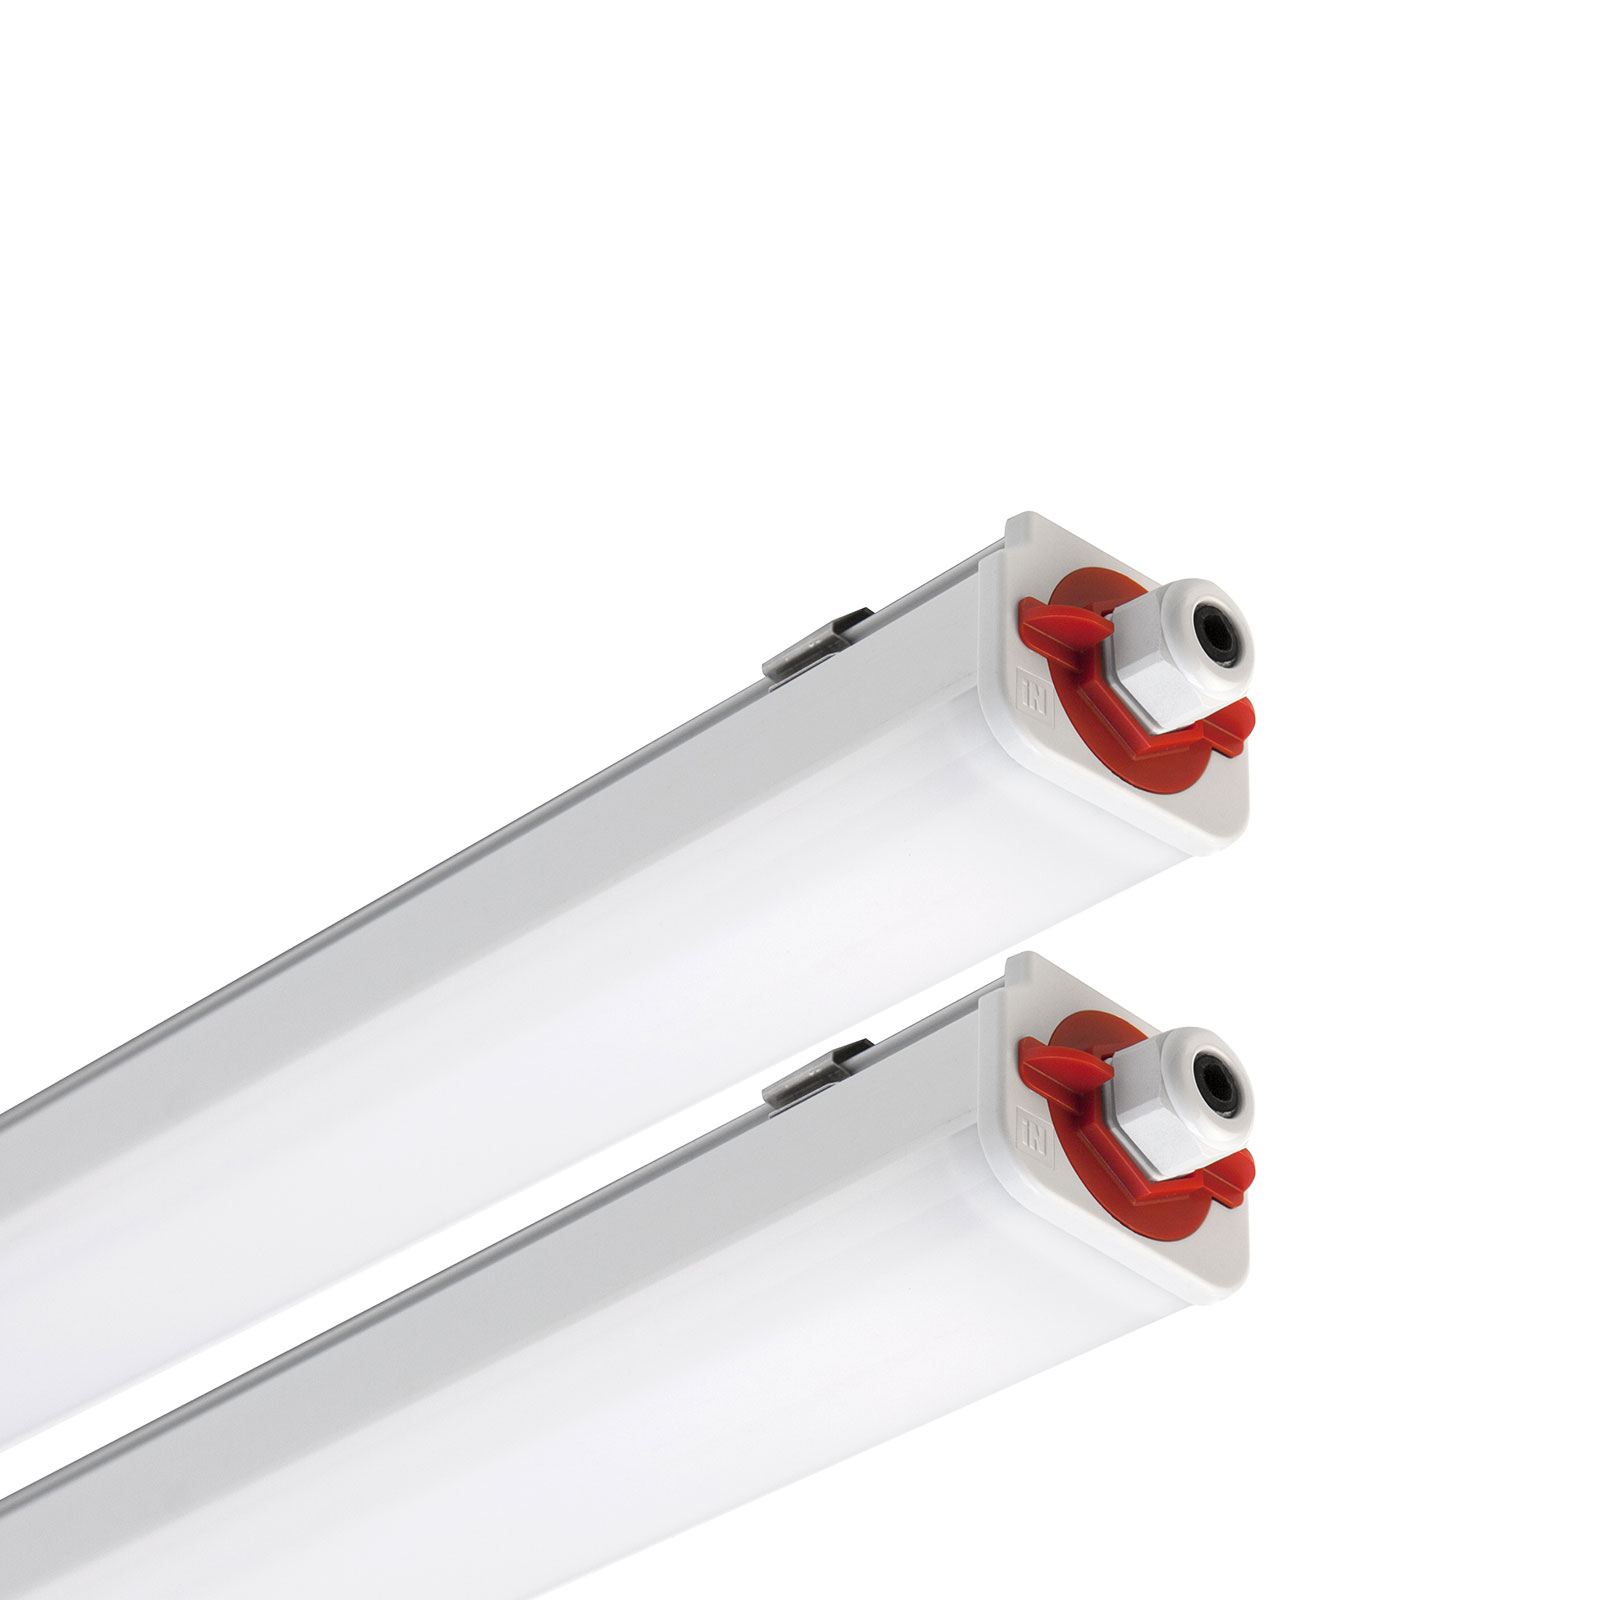 LED-taklampe Norma+120 CL, 34 W 5134 lm 120 cm